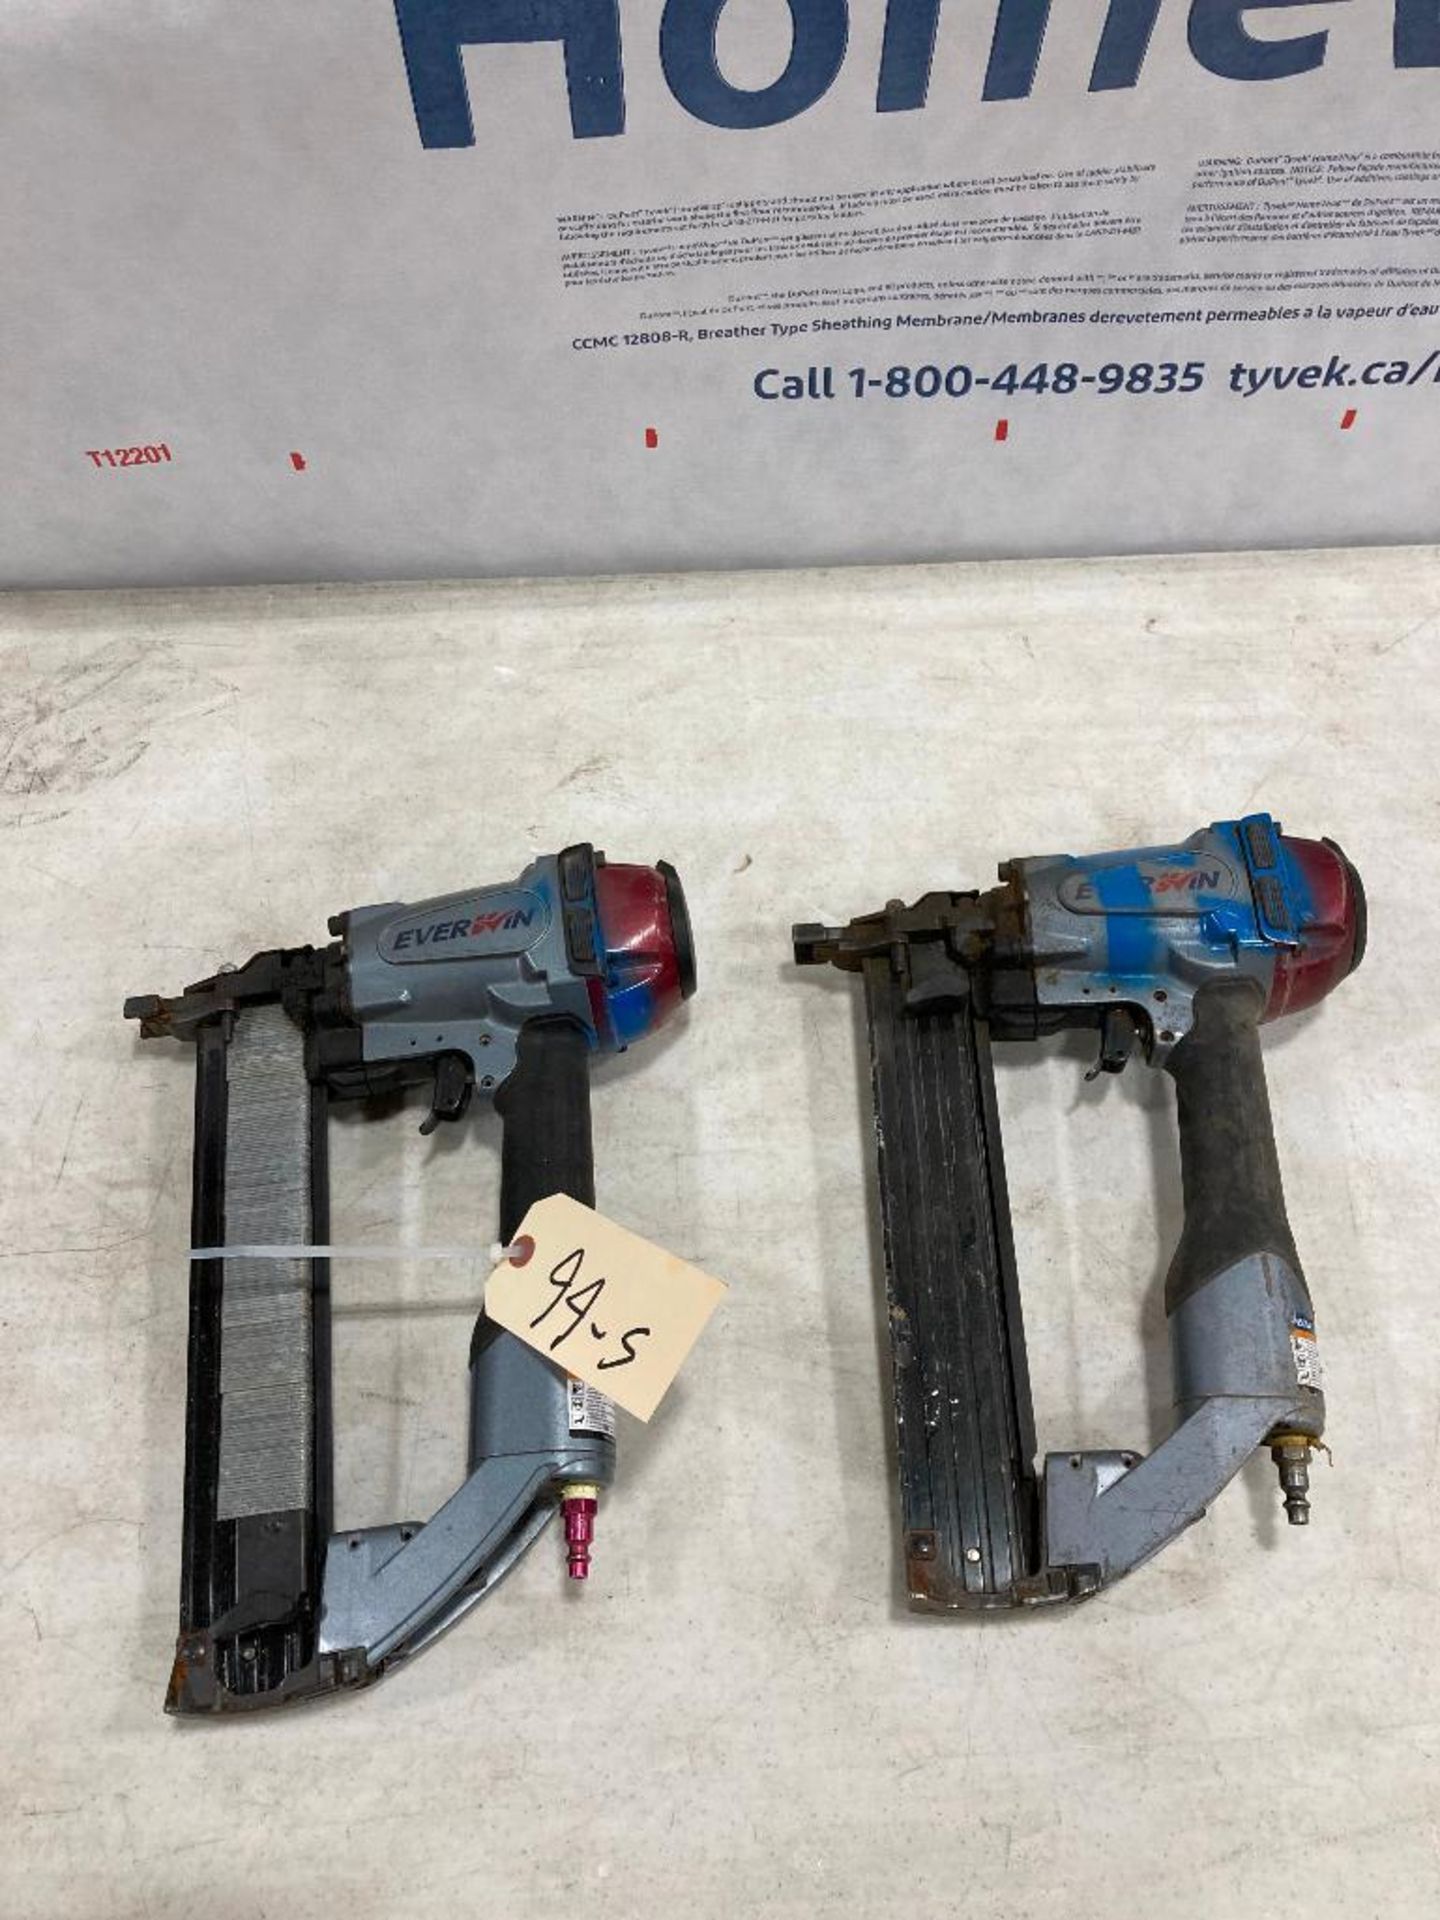 Lot of (2) Everwin SN50S4 Pneumatic Staplers - Image 2 of 6